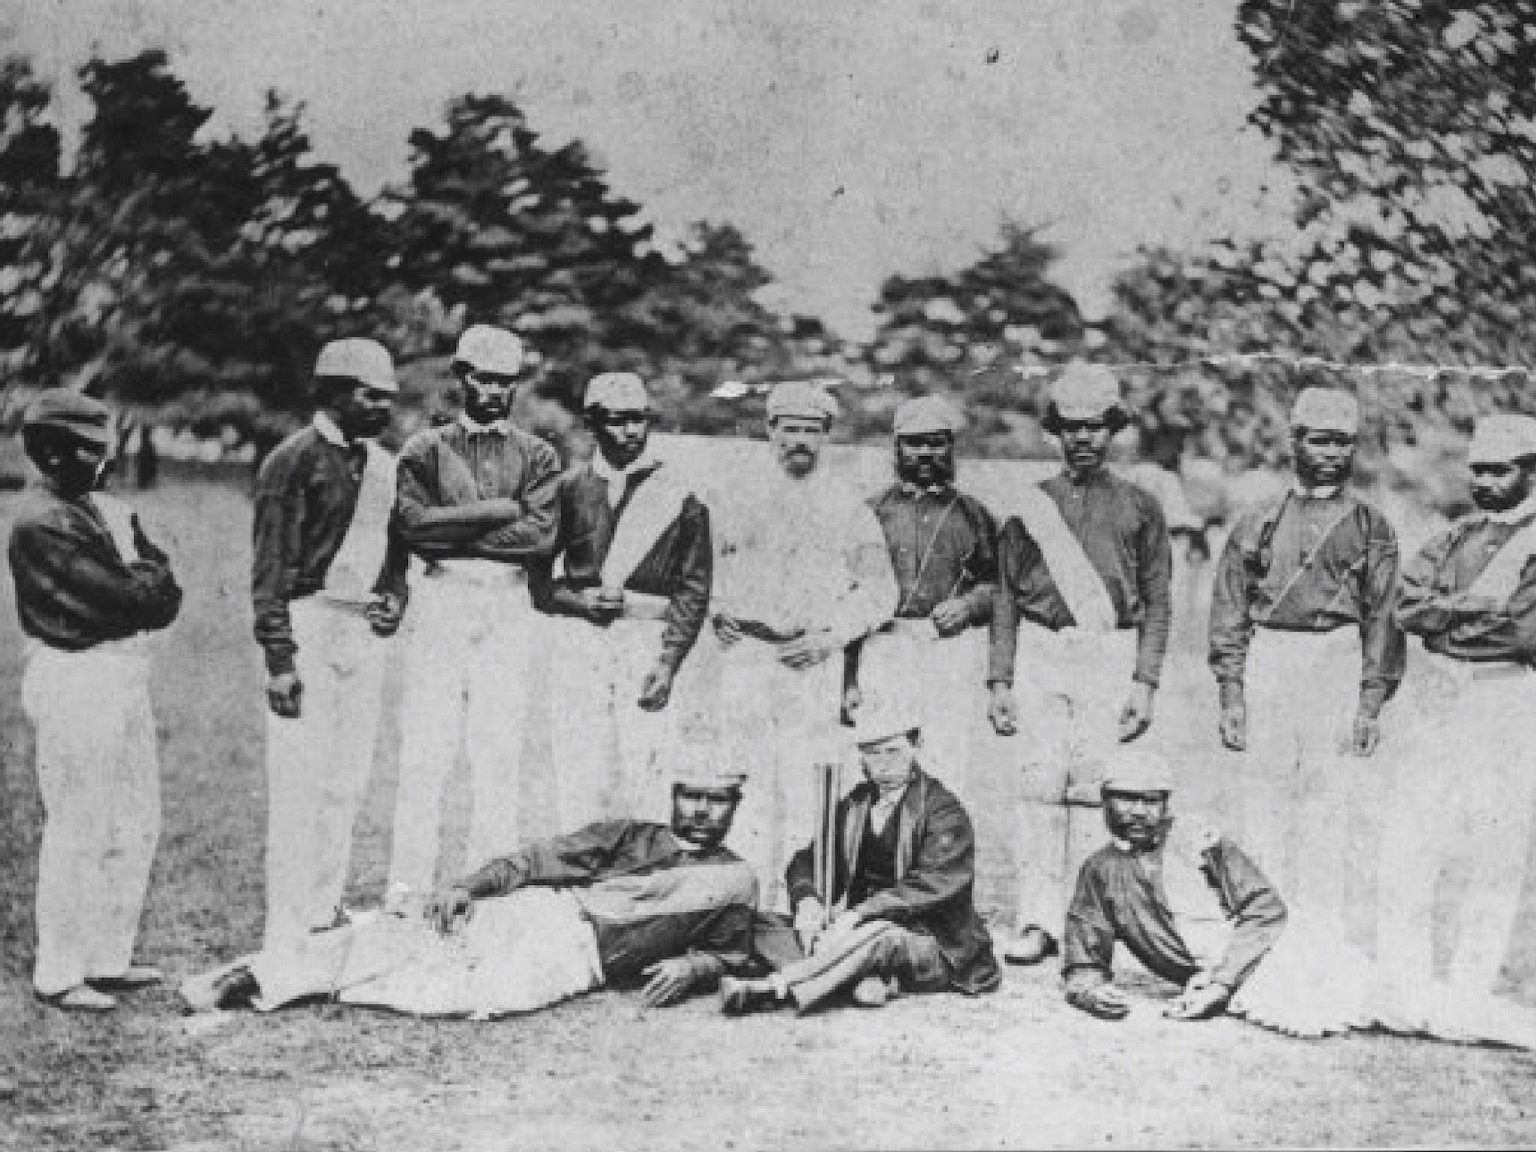 The First XI of 1868 in Swansea UK